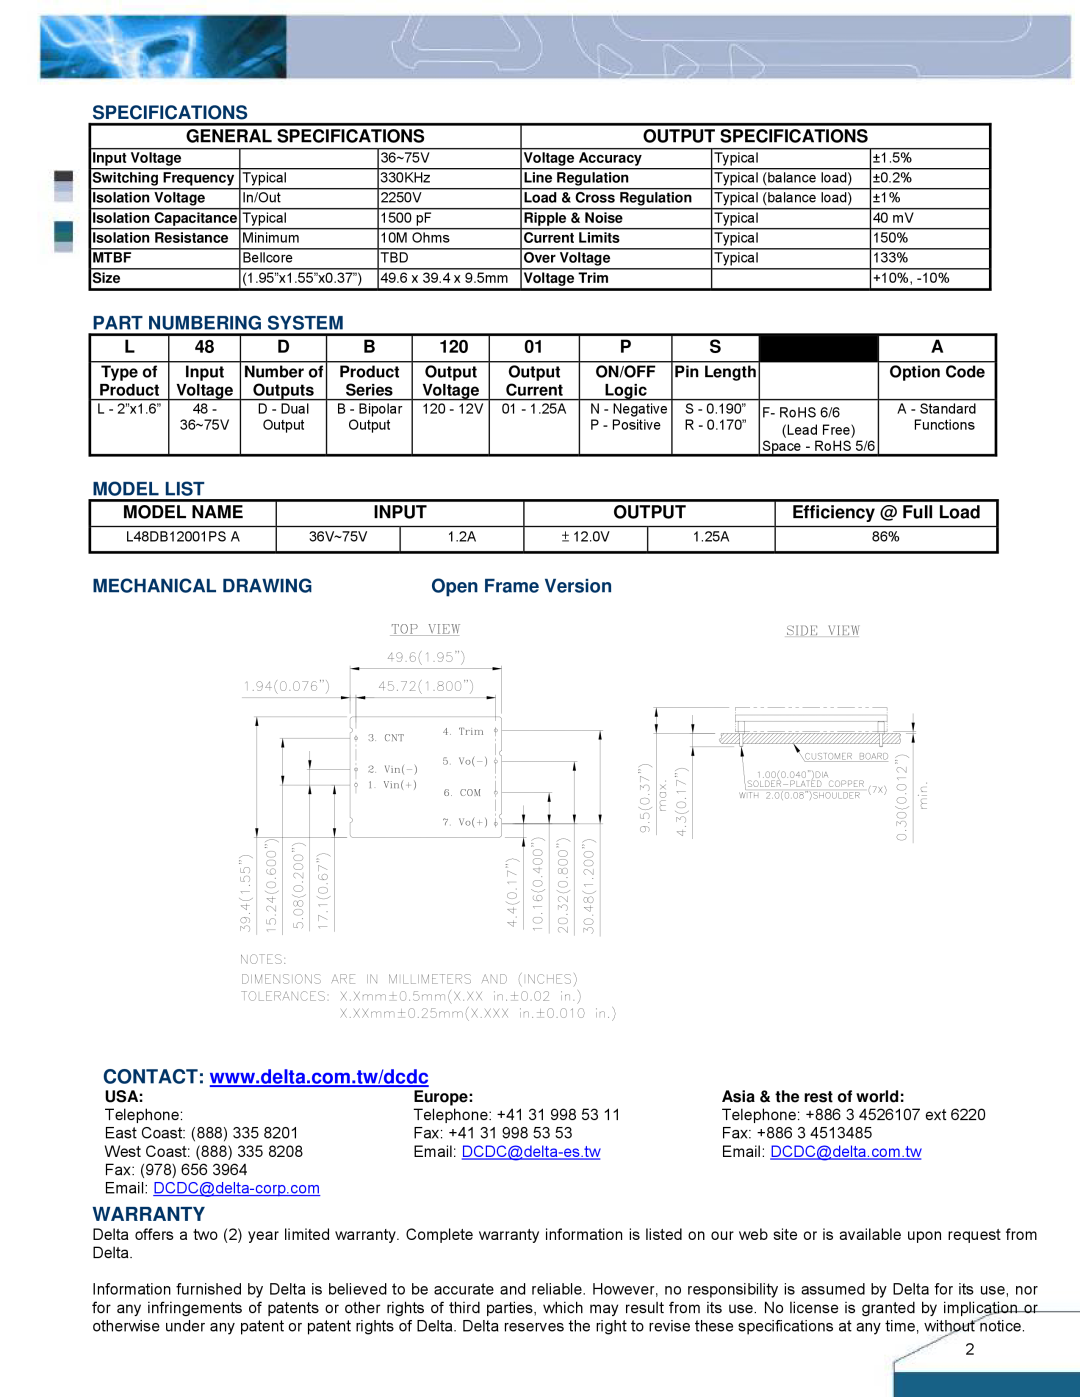 Delta Electronics Series L48DB Warranty, Specifications, Part Numbering System, Model List, Mechanical Drawing, Model Name 